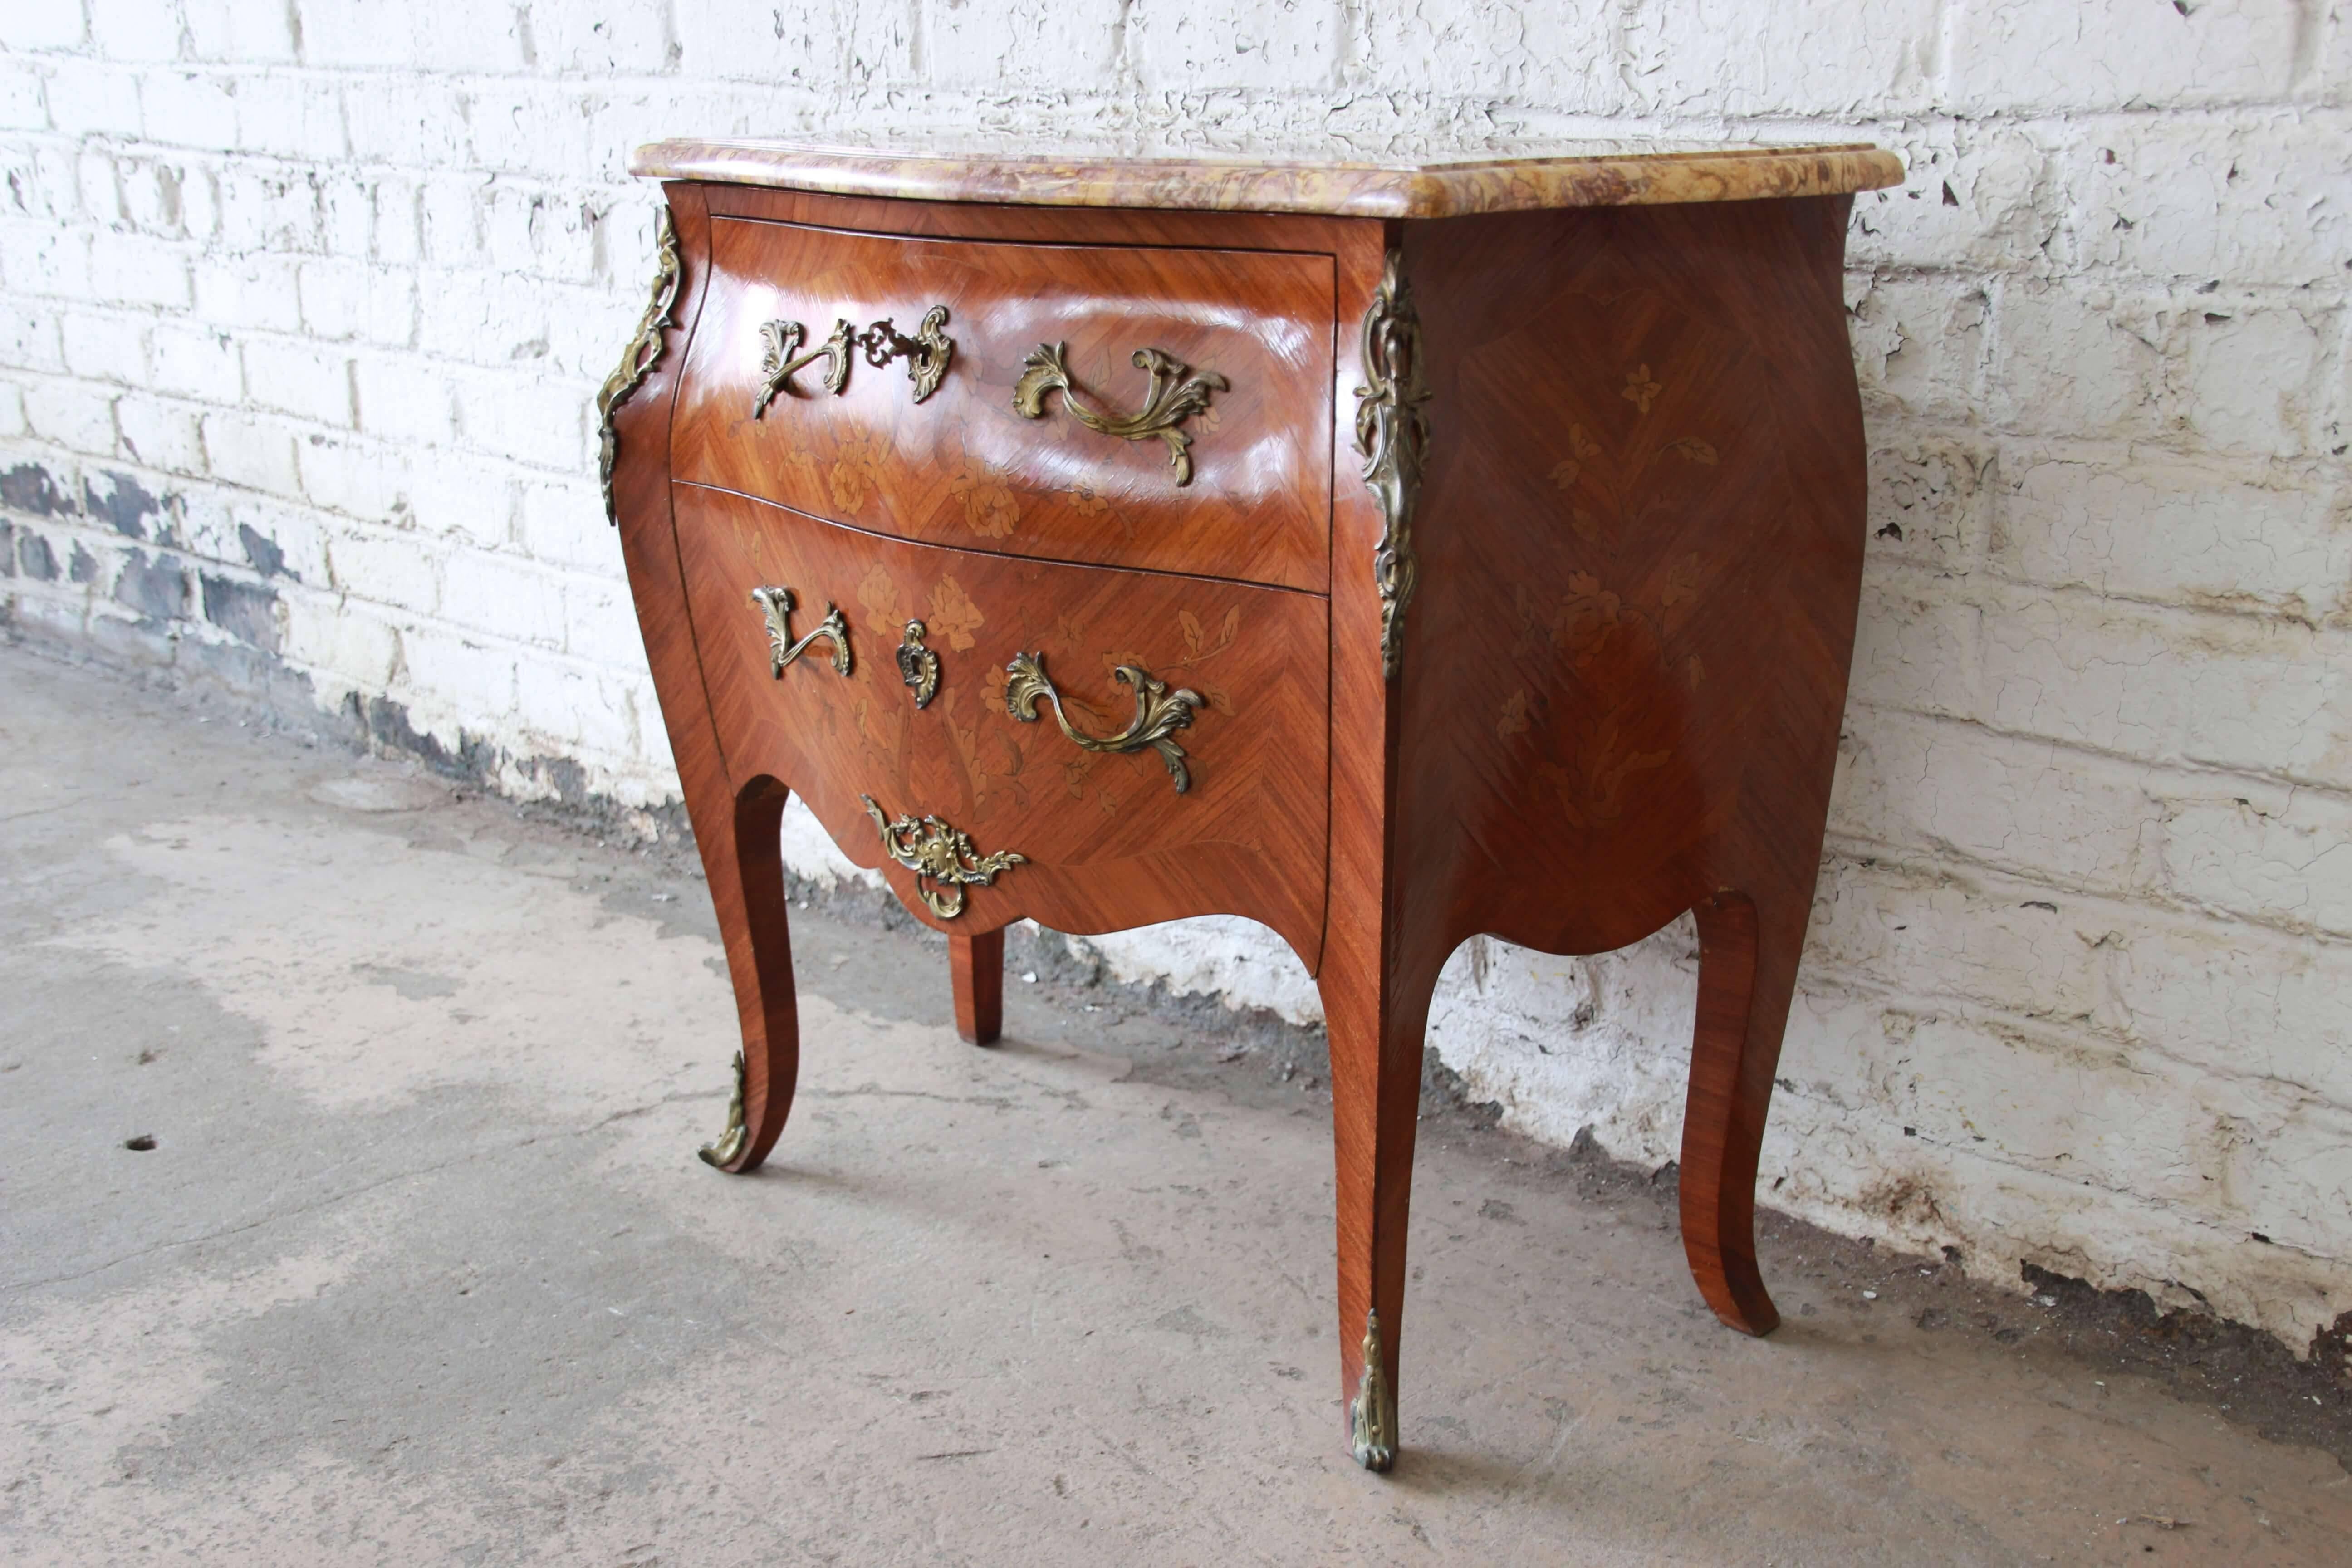 Offering a very nice French marble-top inlaid Bombay chest. The chest has two large drawers that offer plenty of storage with beautiful floral inlays and bronze ormolu. This beautiful design continues throughout the piece and has a nice marble top.